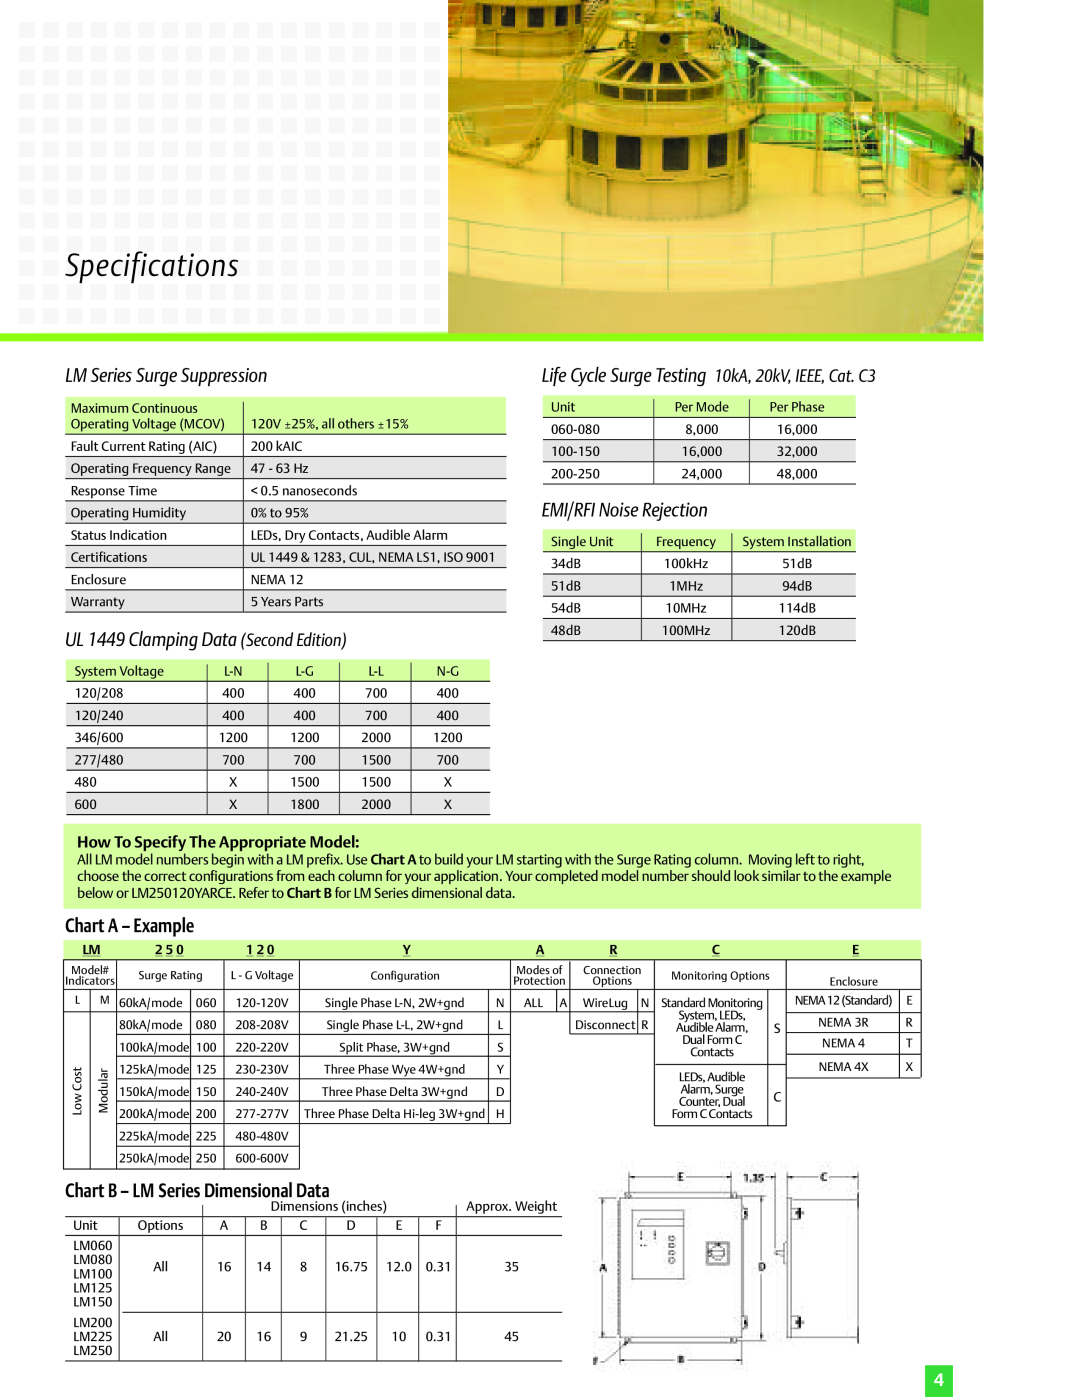 Emerson Specifications, LM Series Surge Suppression, UL 1449 Clamping Data Second Edition, EMI/RFI Noise Rejection 